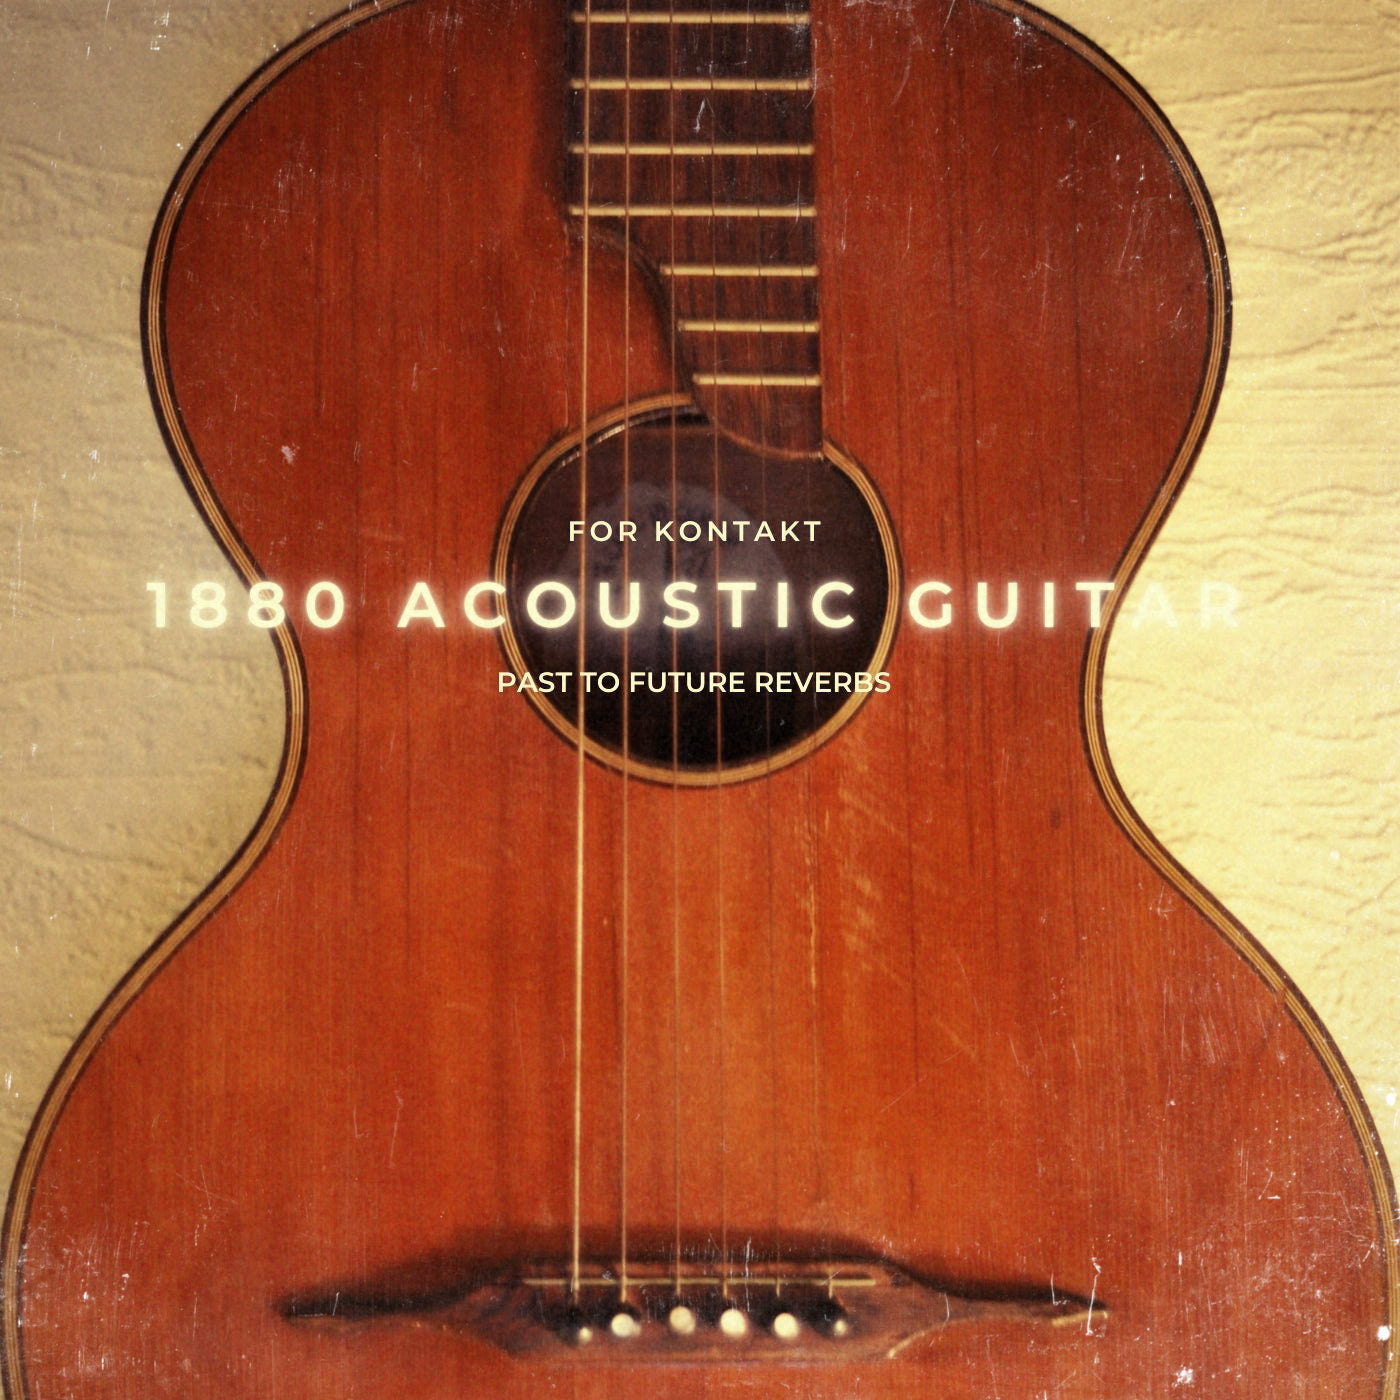 Past To Future - 1880 Acoustic Guitar For Kontakt